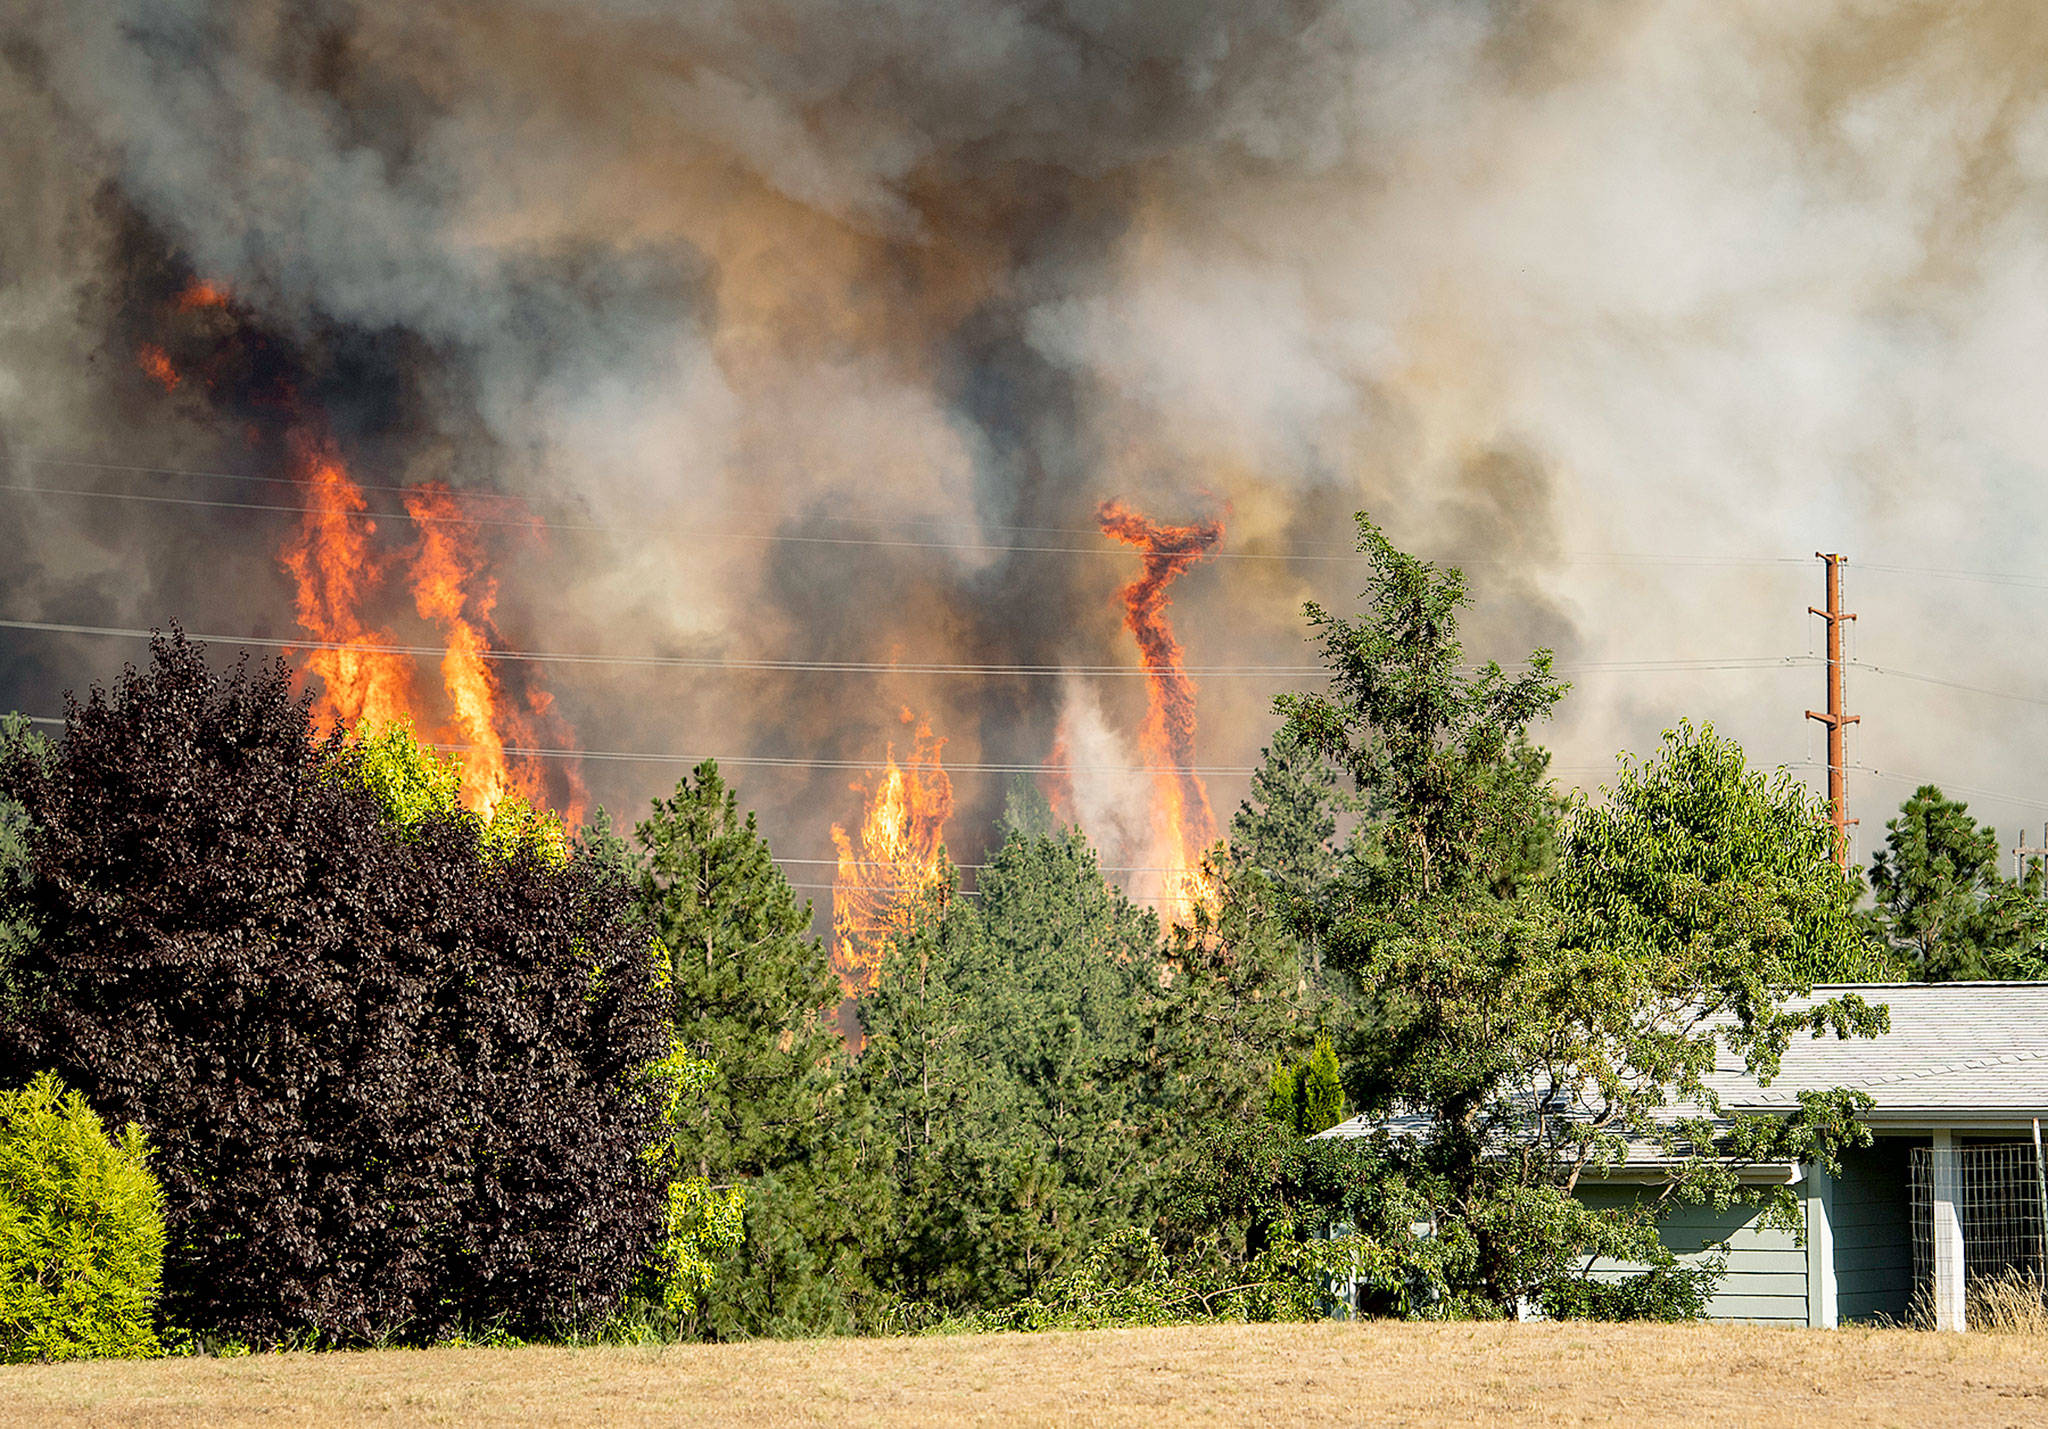 Trees burn near a home Tuesday in Spokane. (Colin Mulvany / The Spokesman-Review)